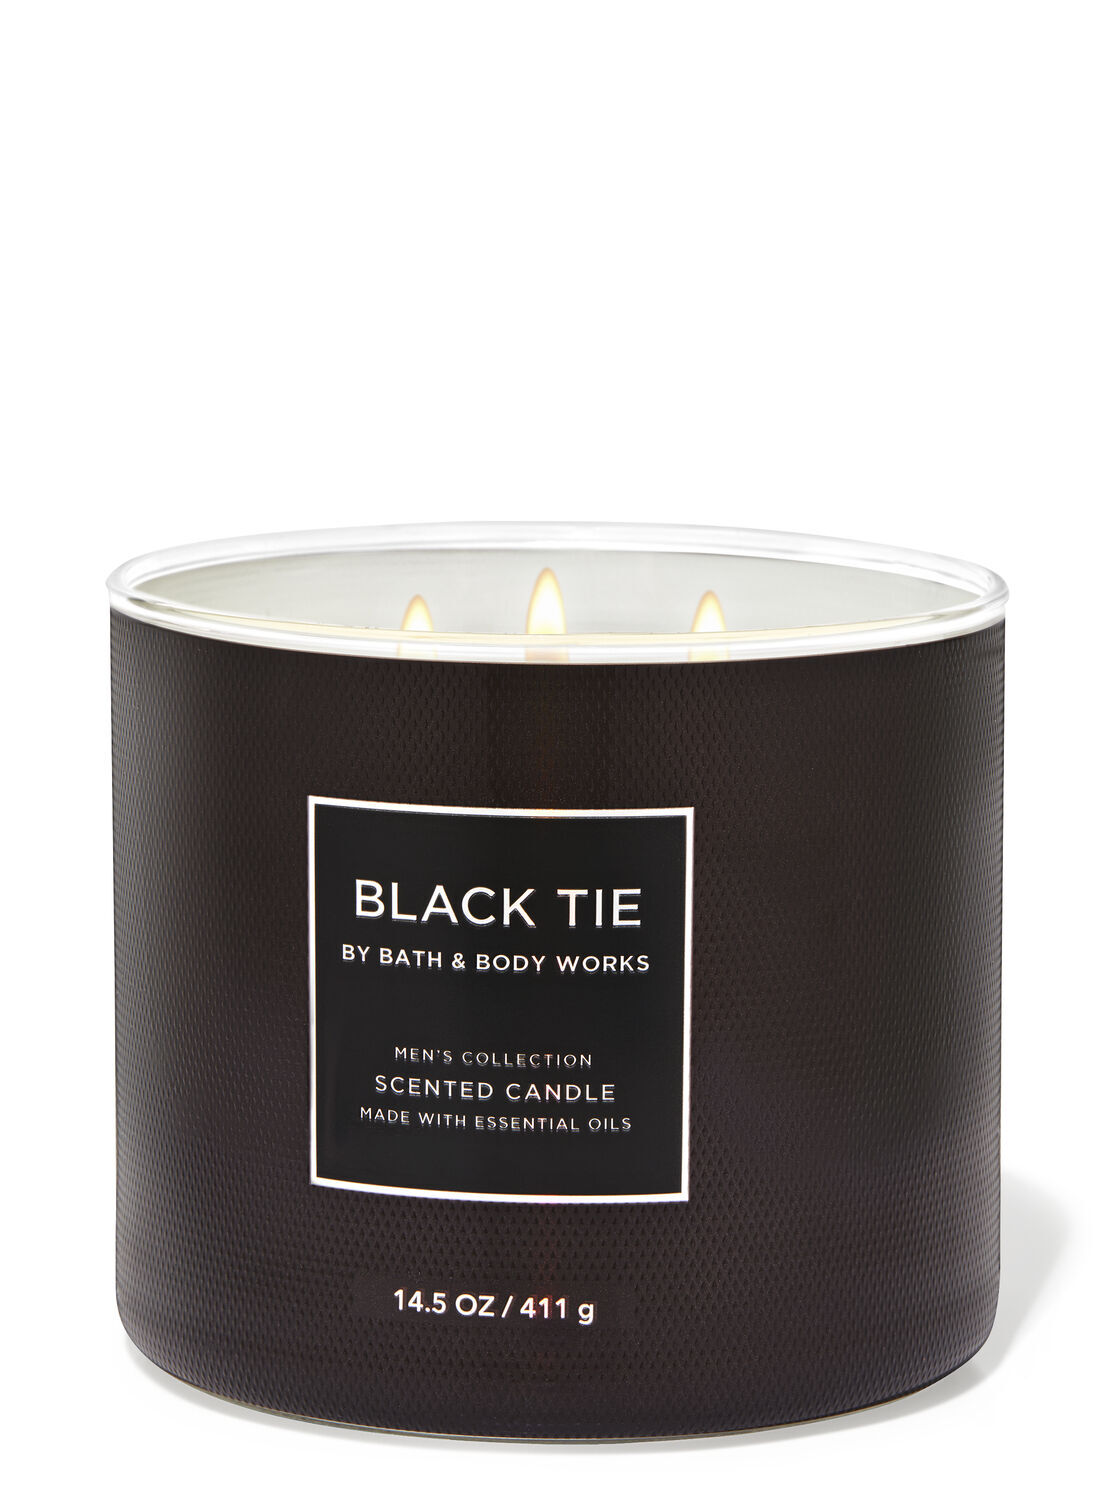 Black tie - scented candle